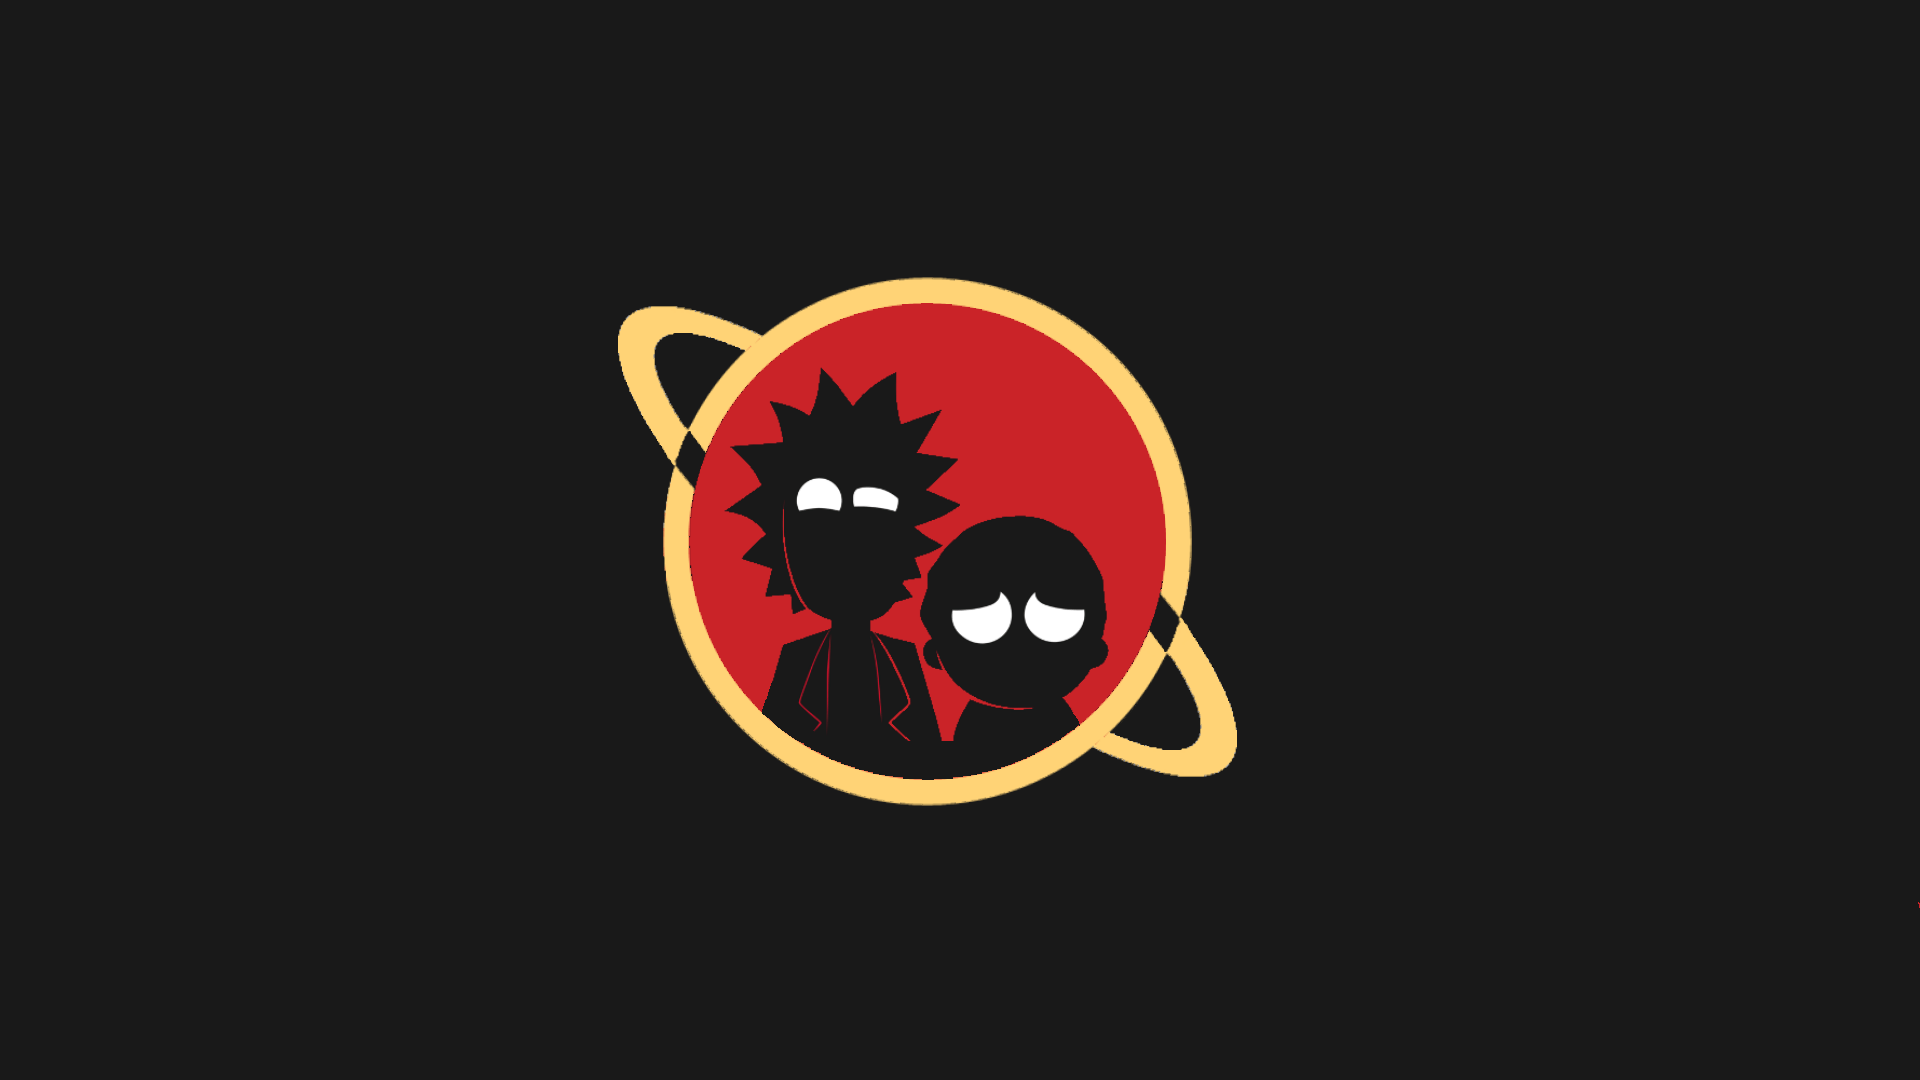 Rick and Morty crossover and Morty Wallpaper 1920x1080